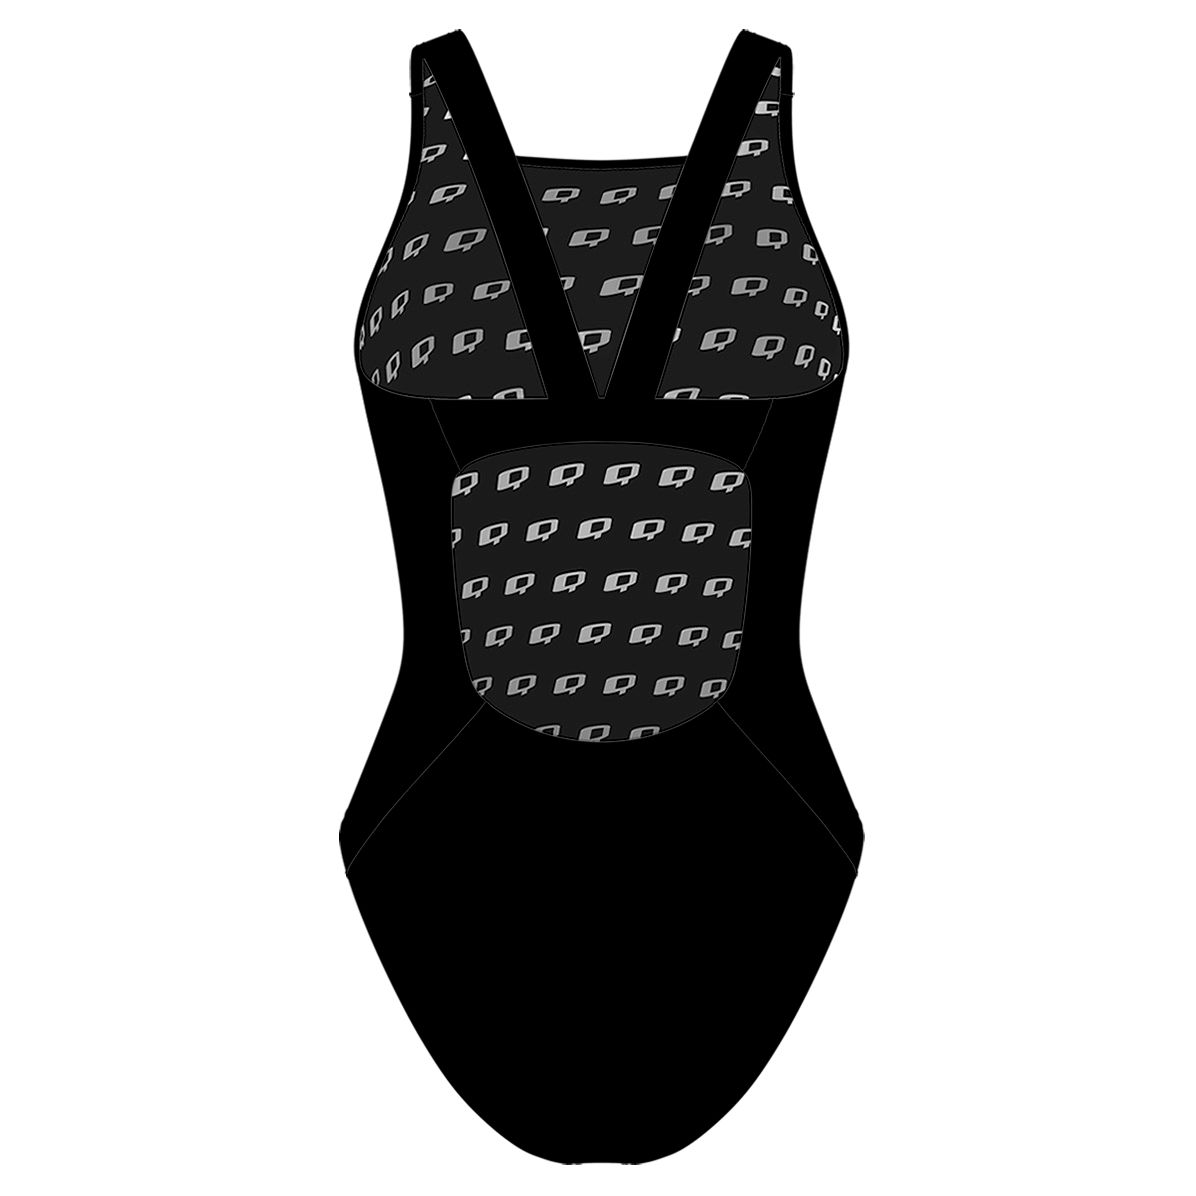 Beverly Hills High School - Classic Strap Swimsuit